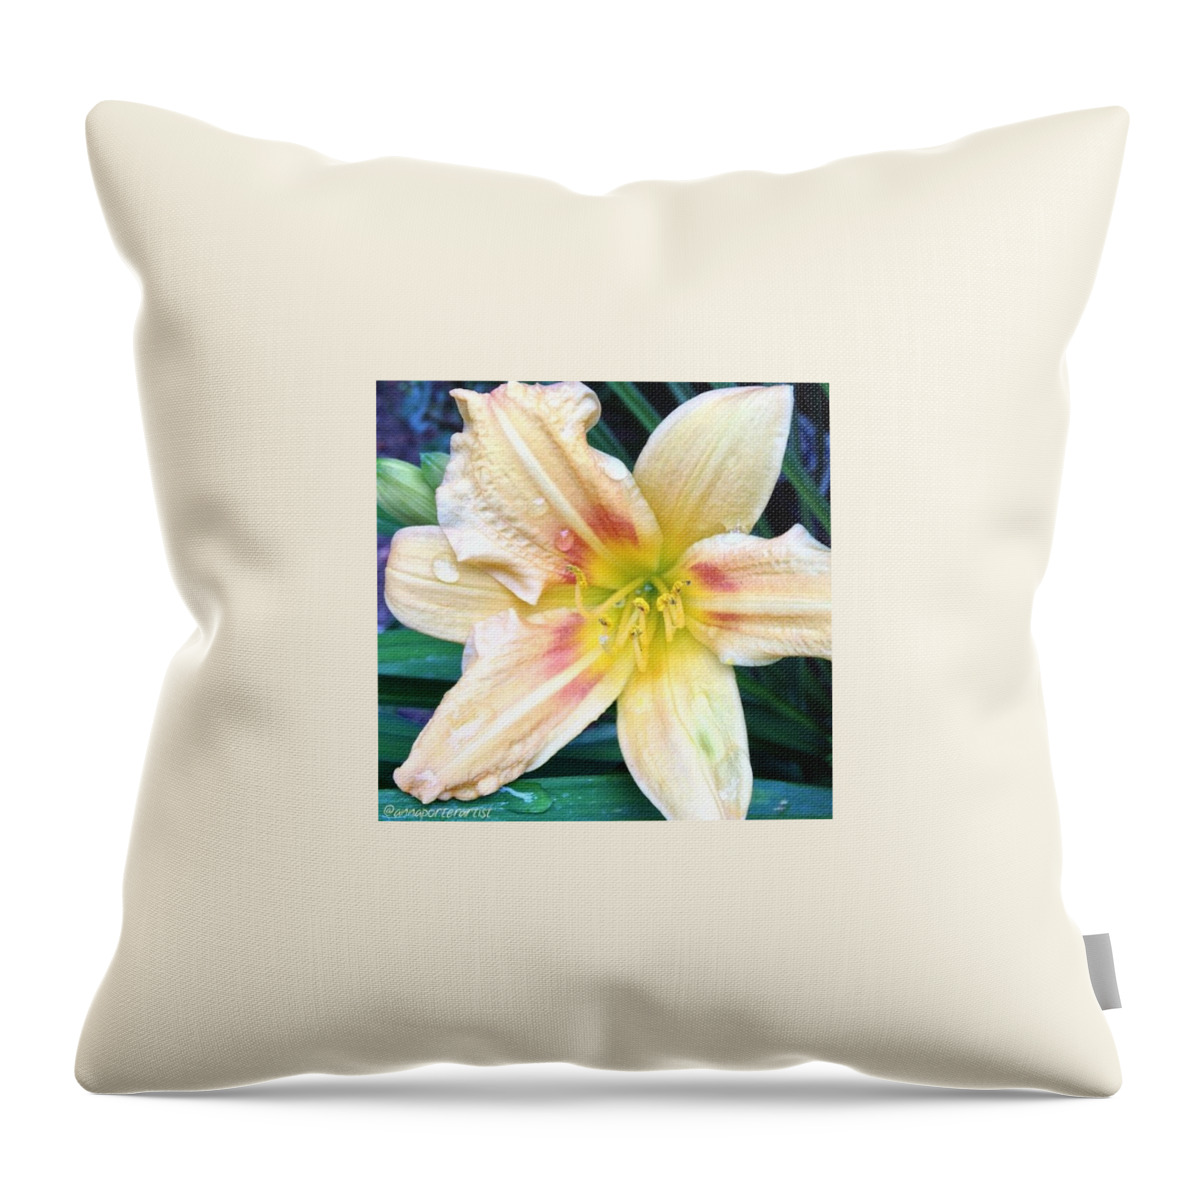 Annasgardens Throw Pillow featuring the photograph Day Lily With Raindrops In My Garden by Anna Porter